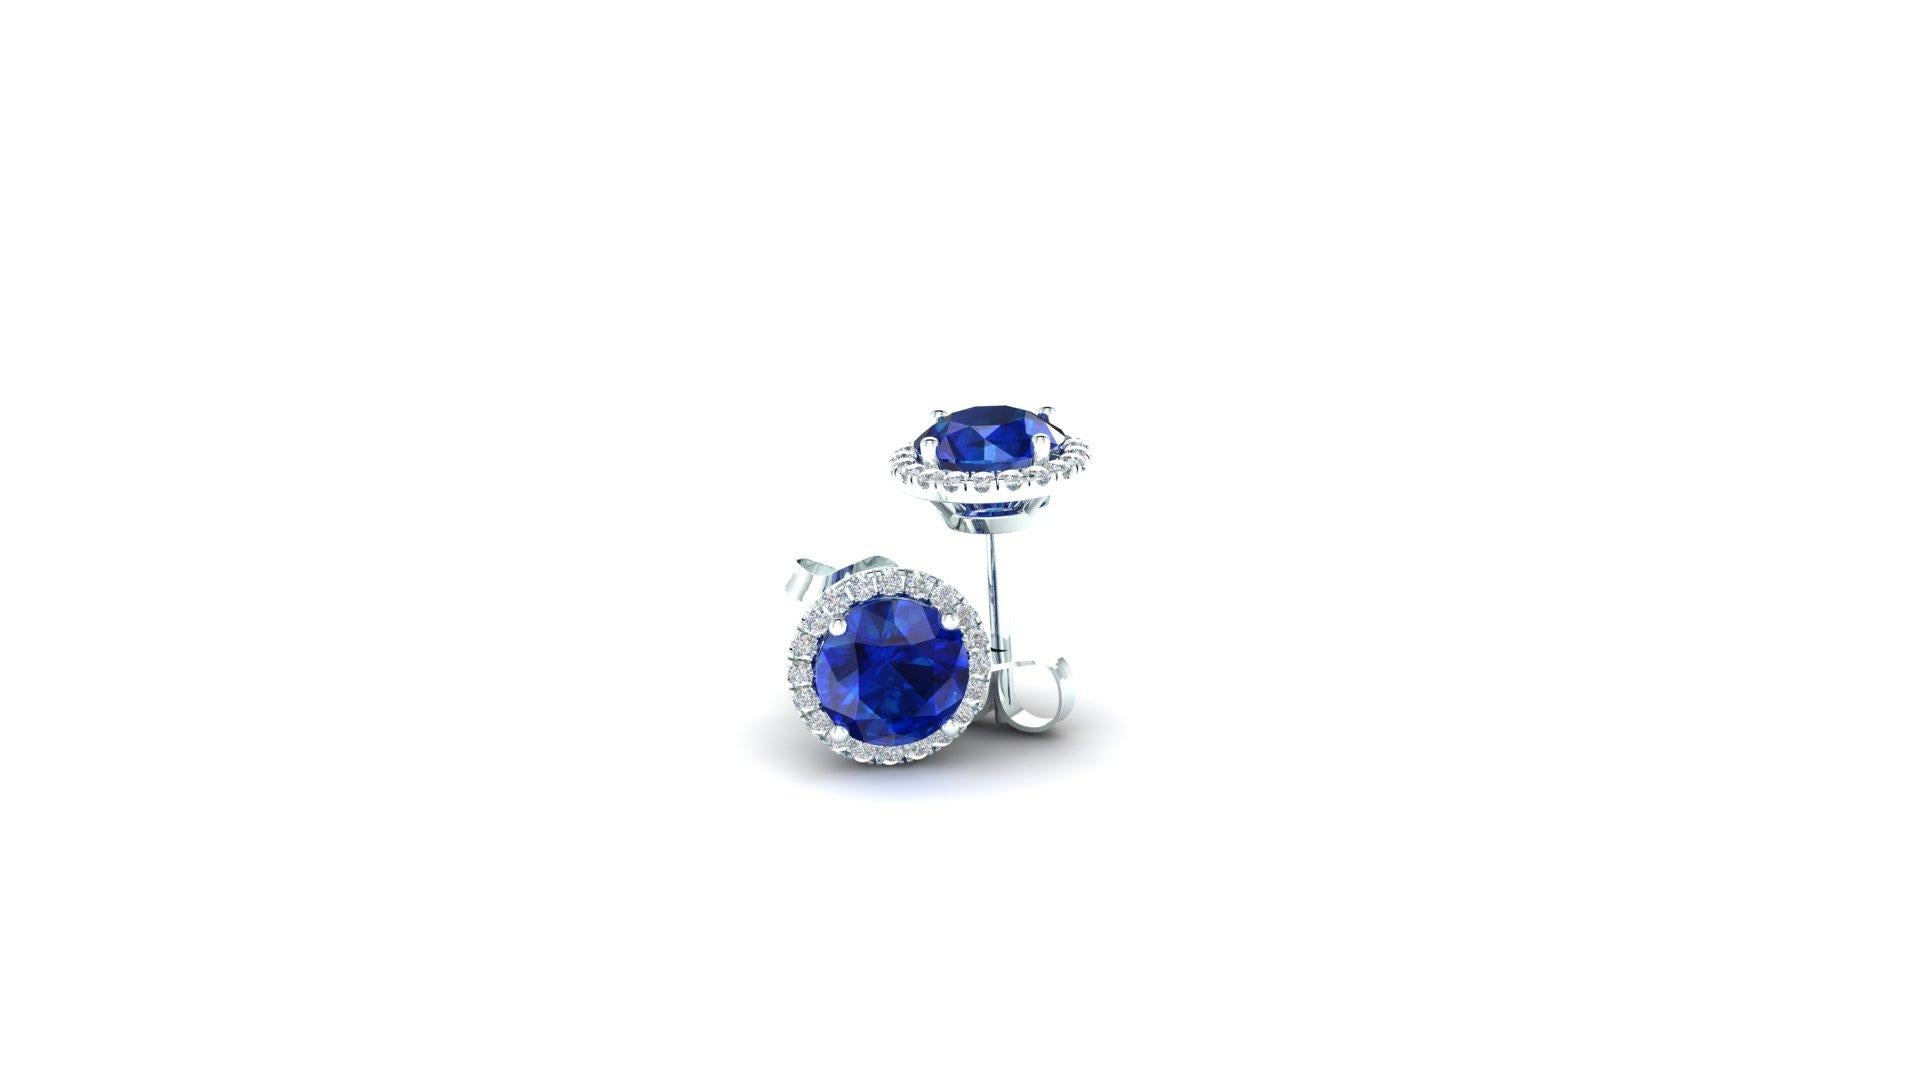 2 Carats Blue Sapphires in Diamond Halo Studs earrings hand made in Platinum, with Screw-Back post,
Brilliant Blue Sapphires with diamond halos enhancing even more these great diamonds, for a total carat weight of 0.26 carats.

The earrings will be